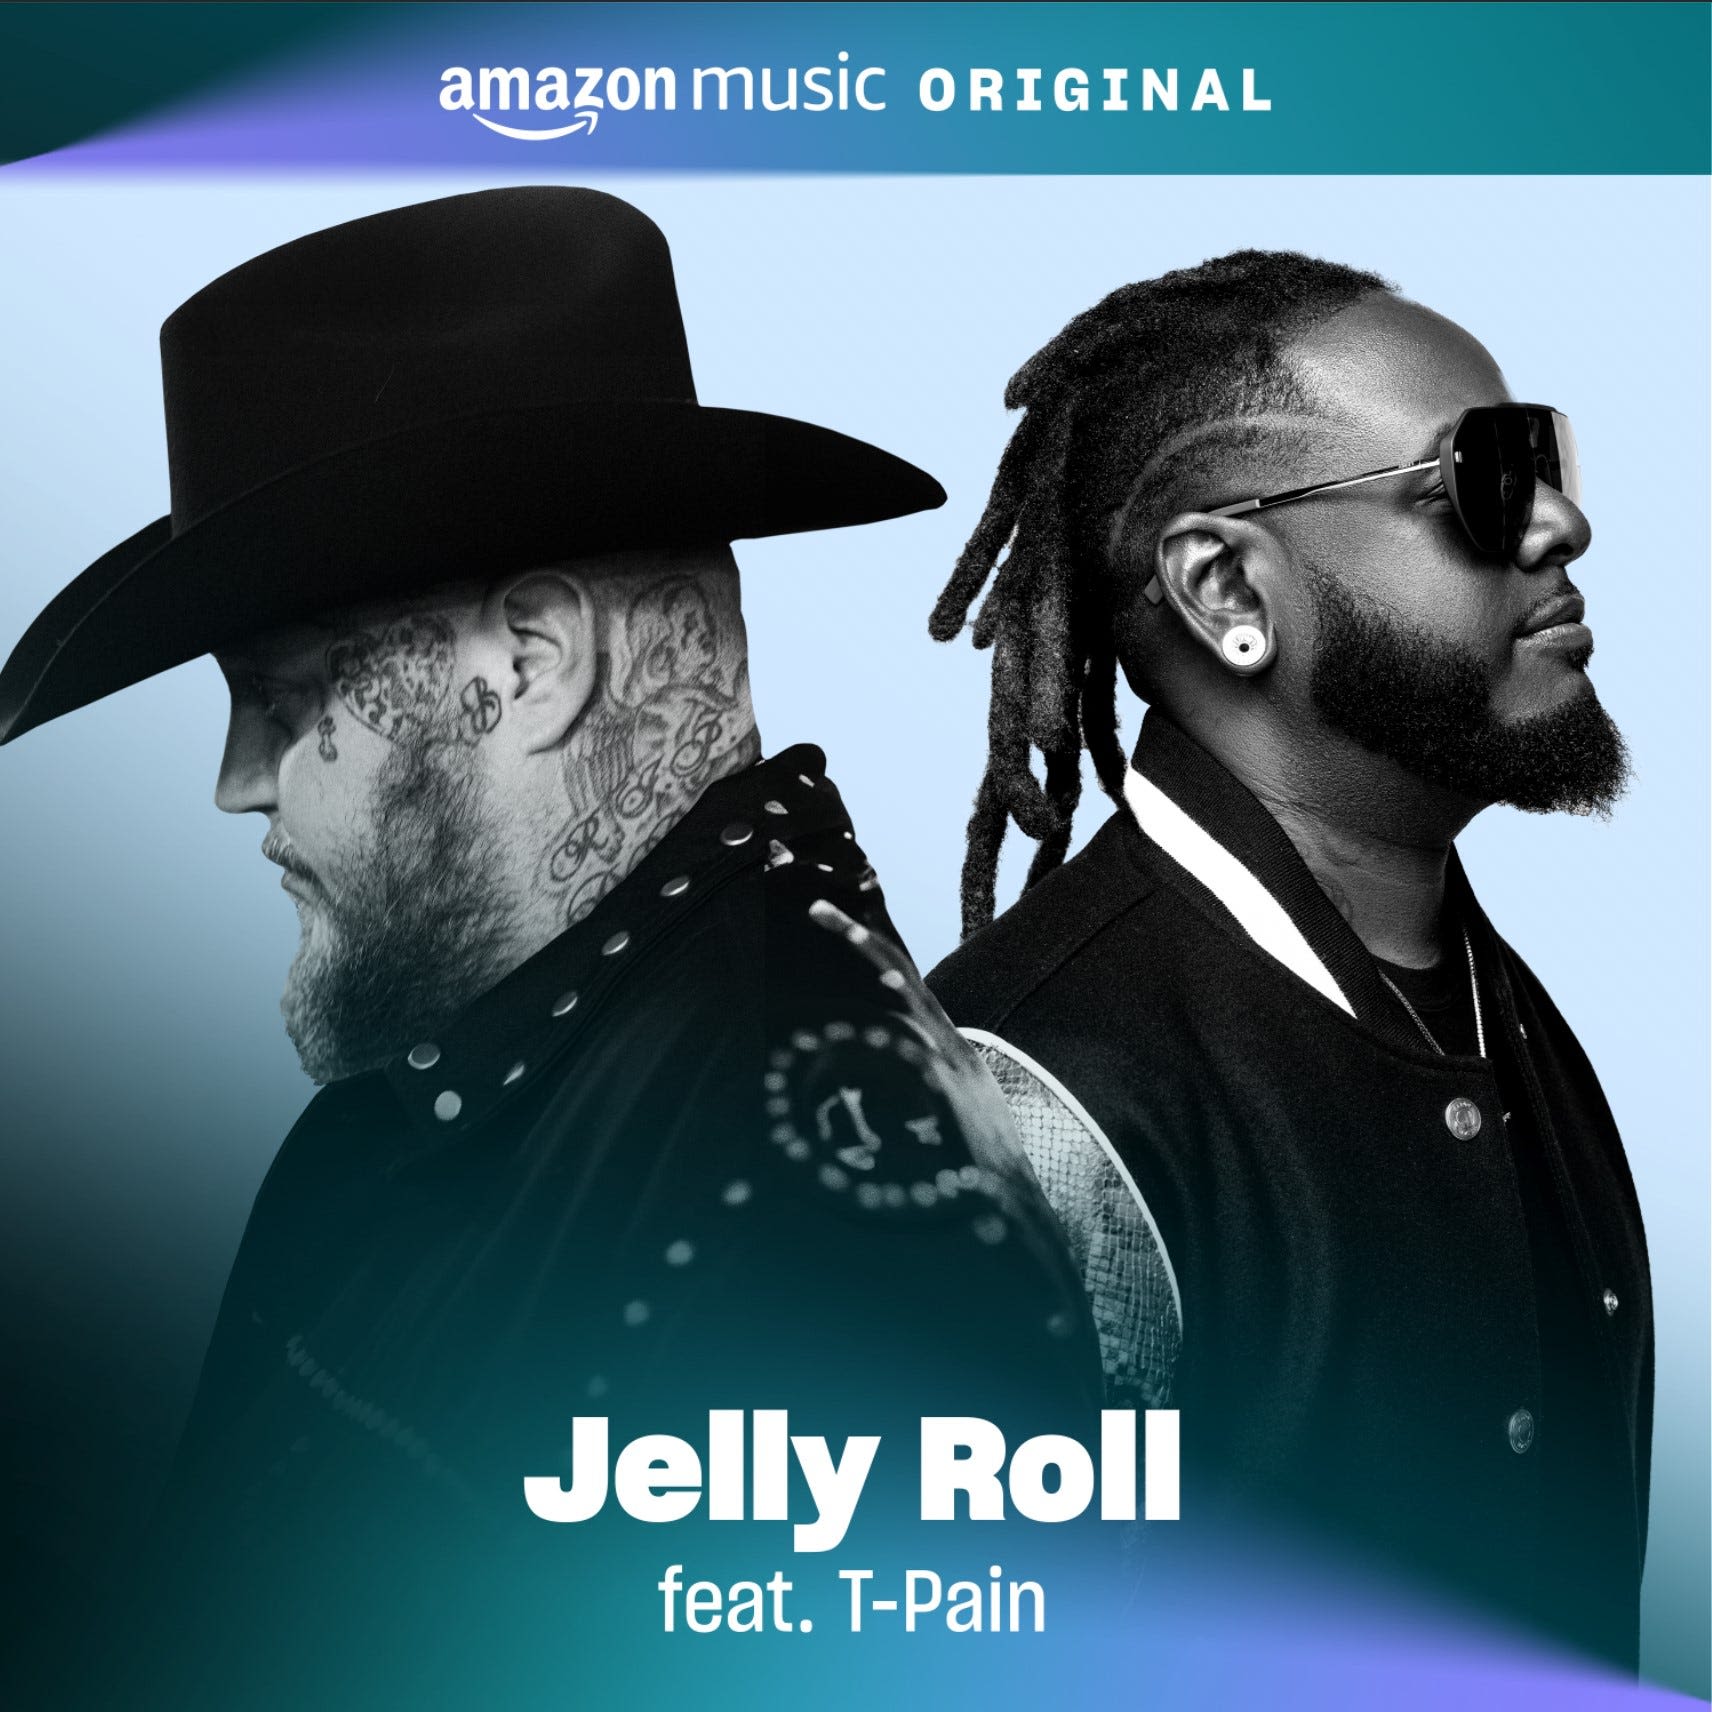 Jelly Roll, T-Pain pair for cover of Toby Keith's 'Should've Been A Cowboy' at Stagecoach